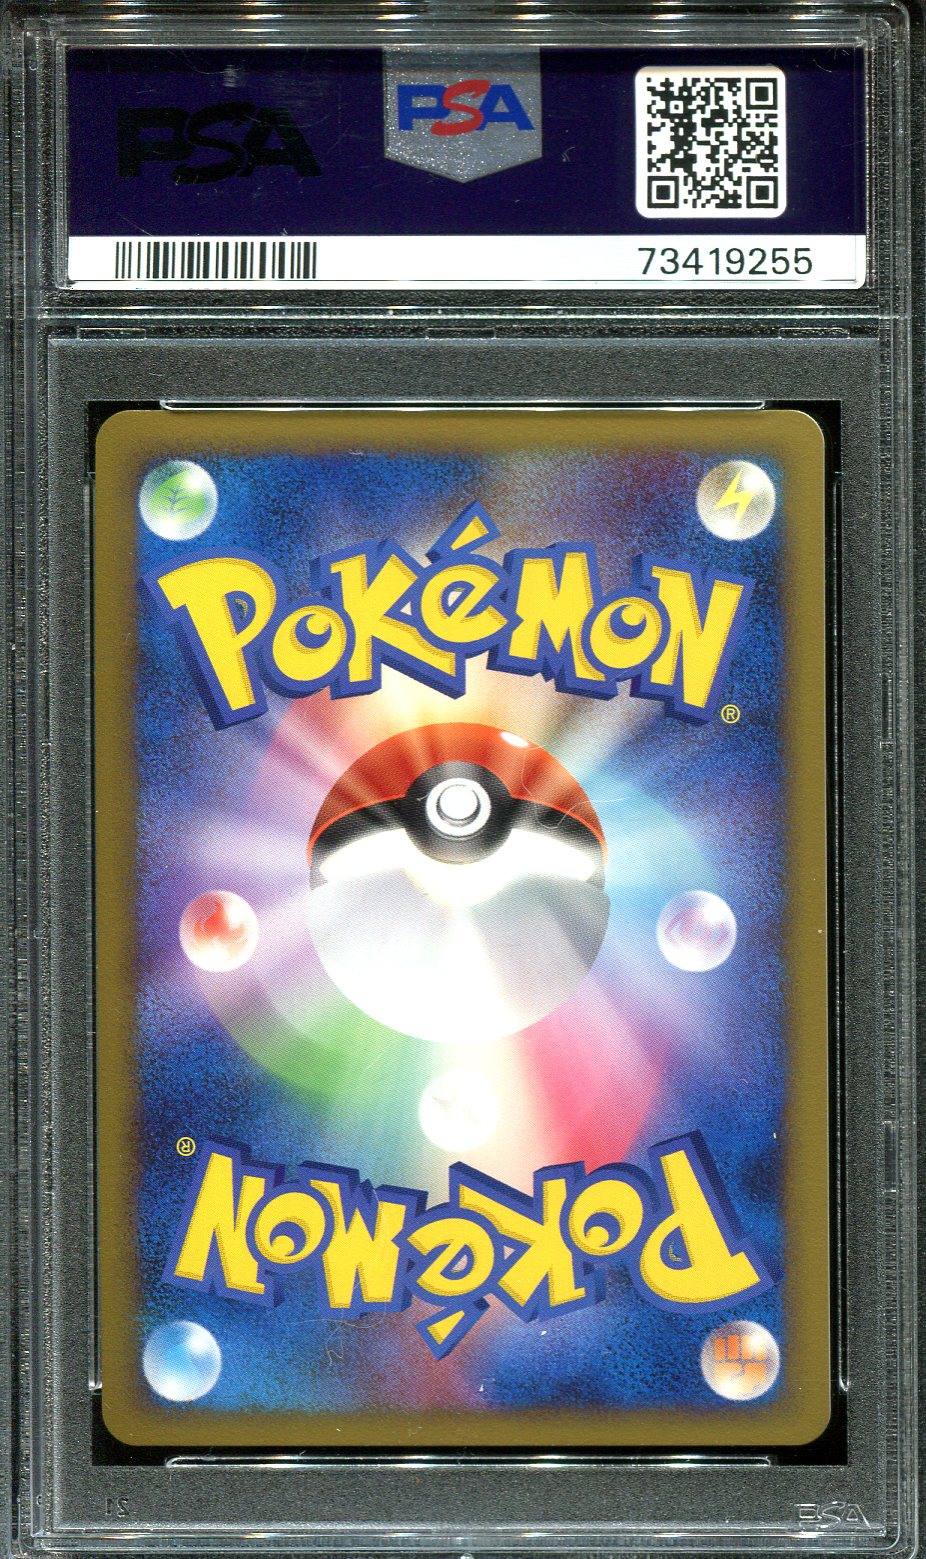 GLACEON 005/012 PSA 10 POKEMON CONSTRUCTED DECK JAPANESE HOLO